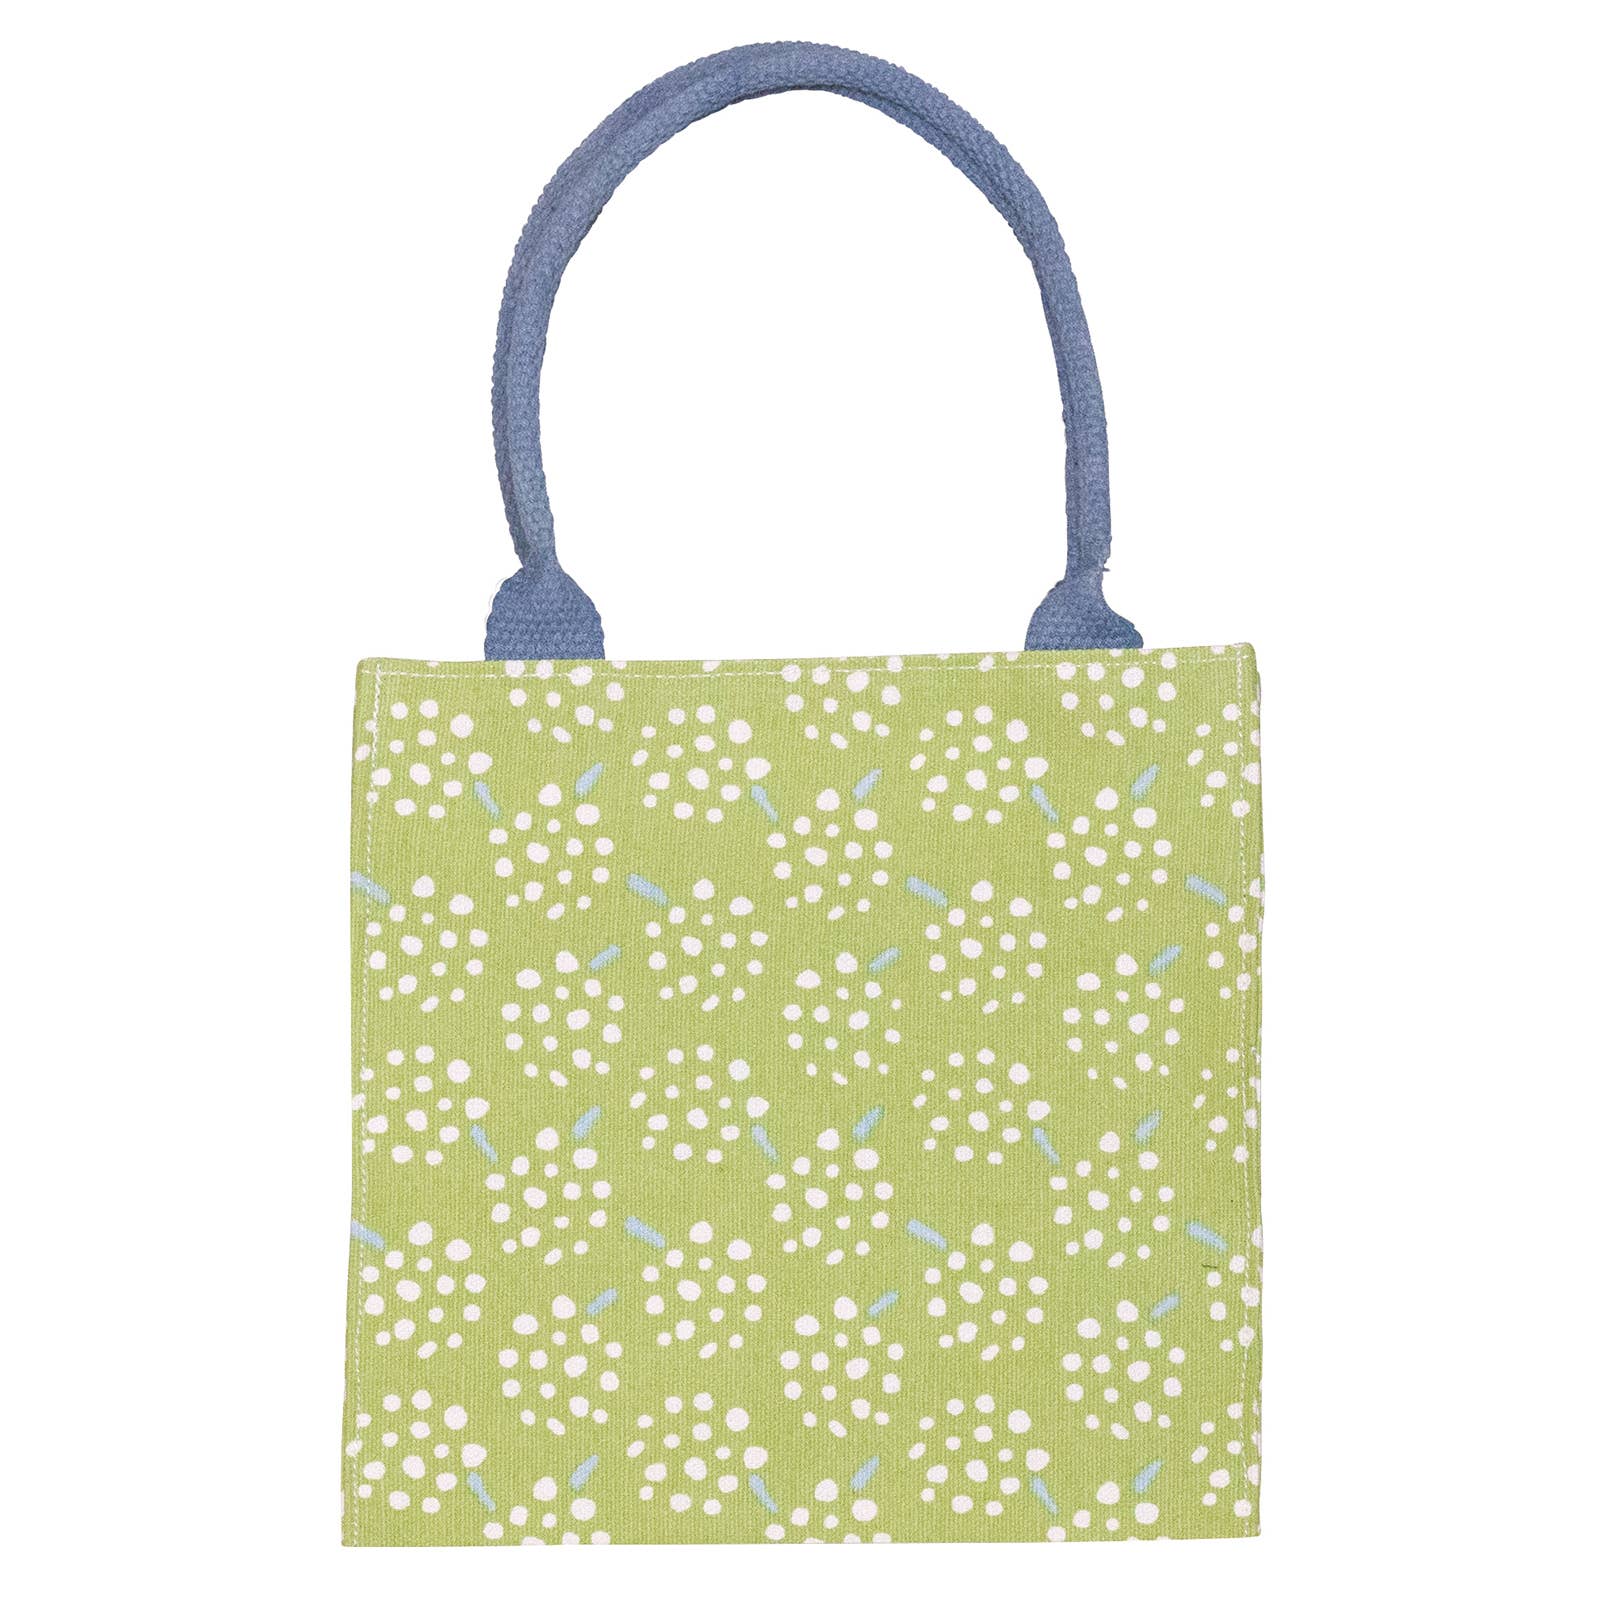 Fae Lime Itsy Bitsy, Pack of 4 (price is per bag)